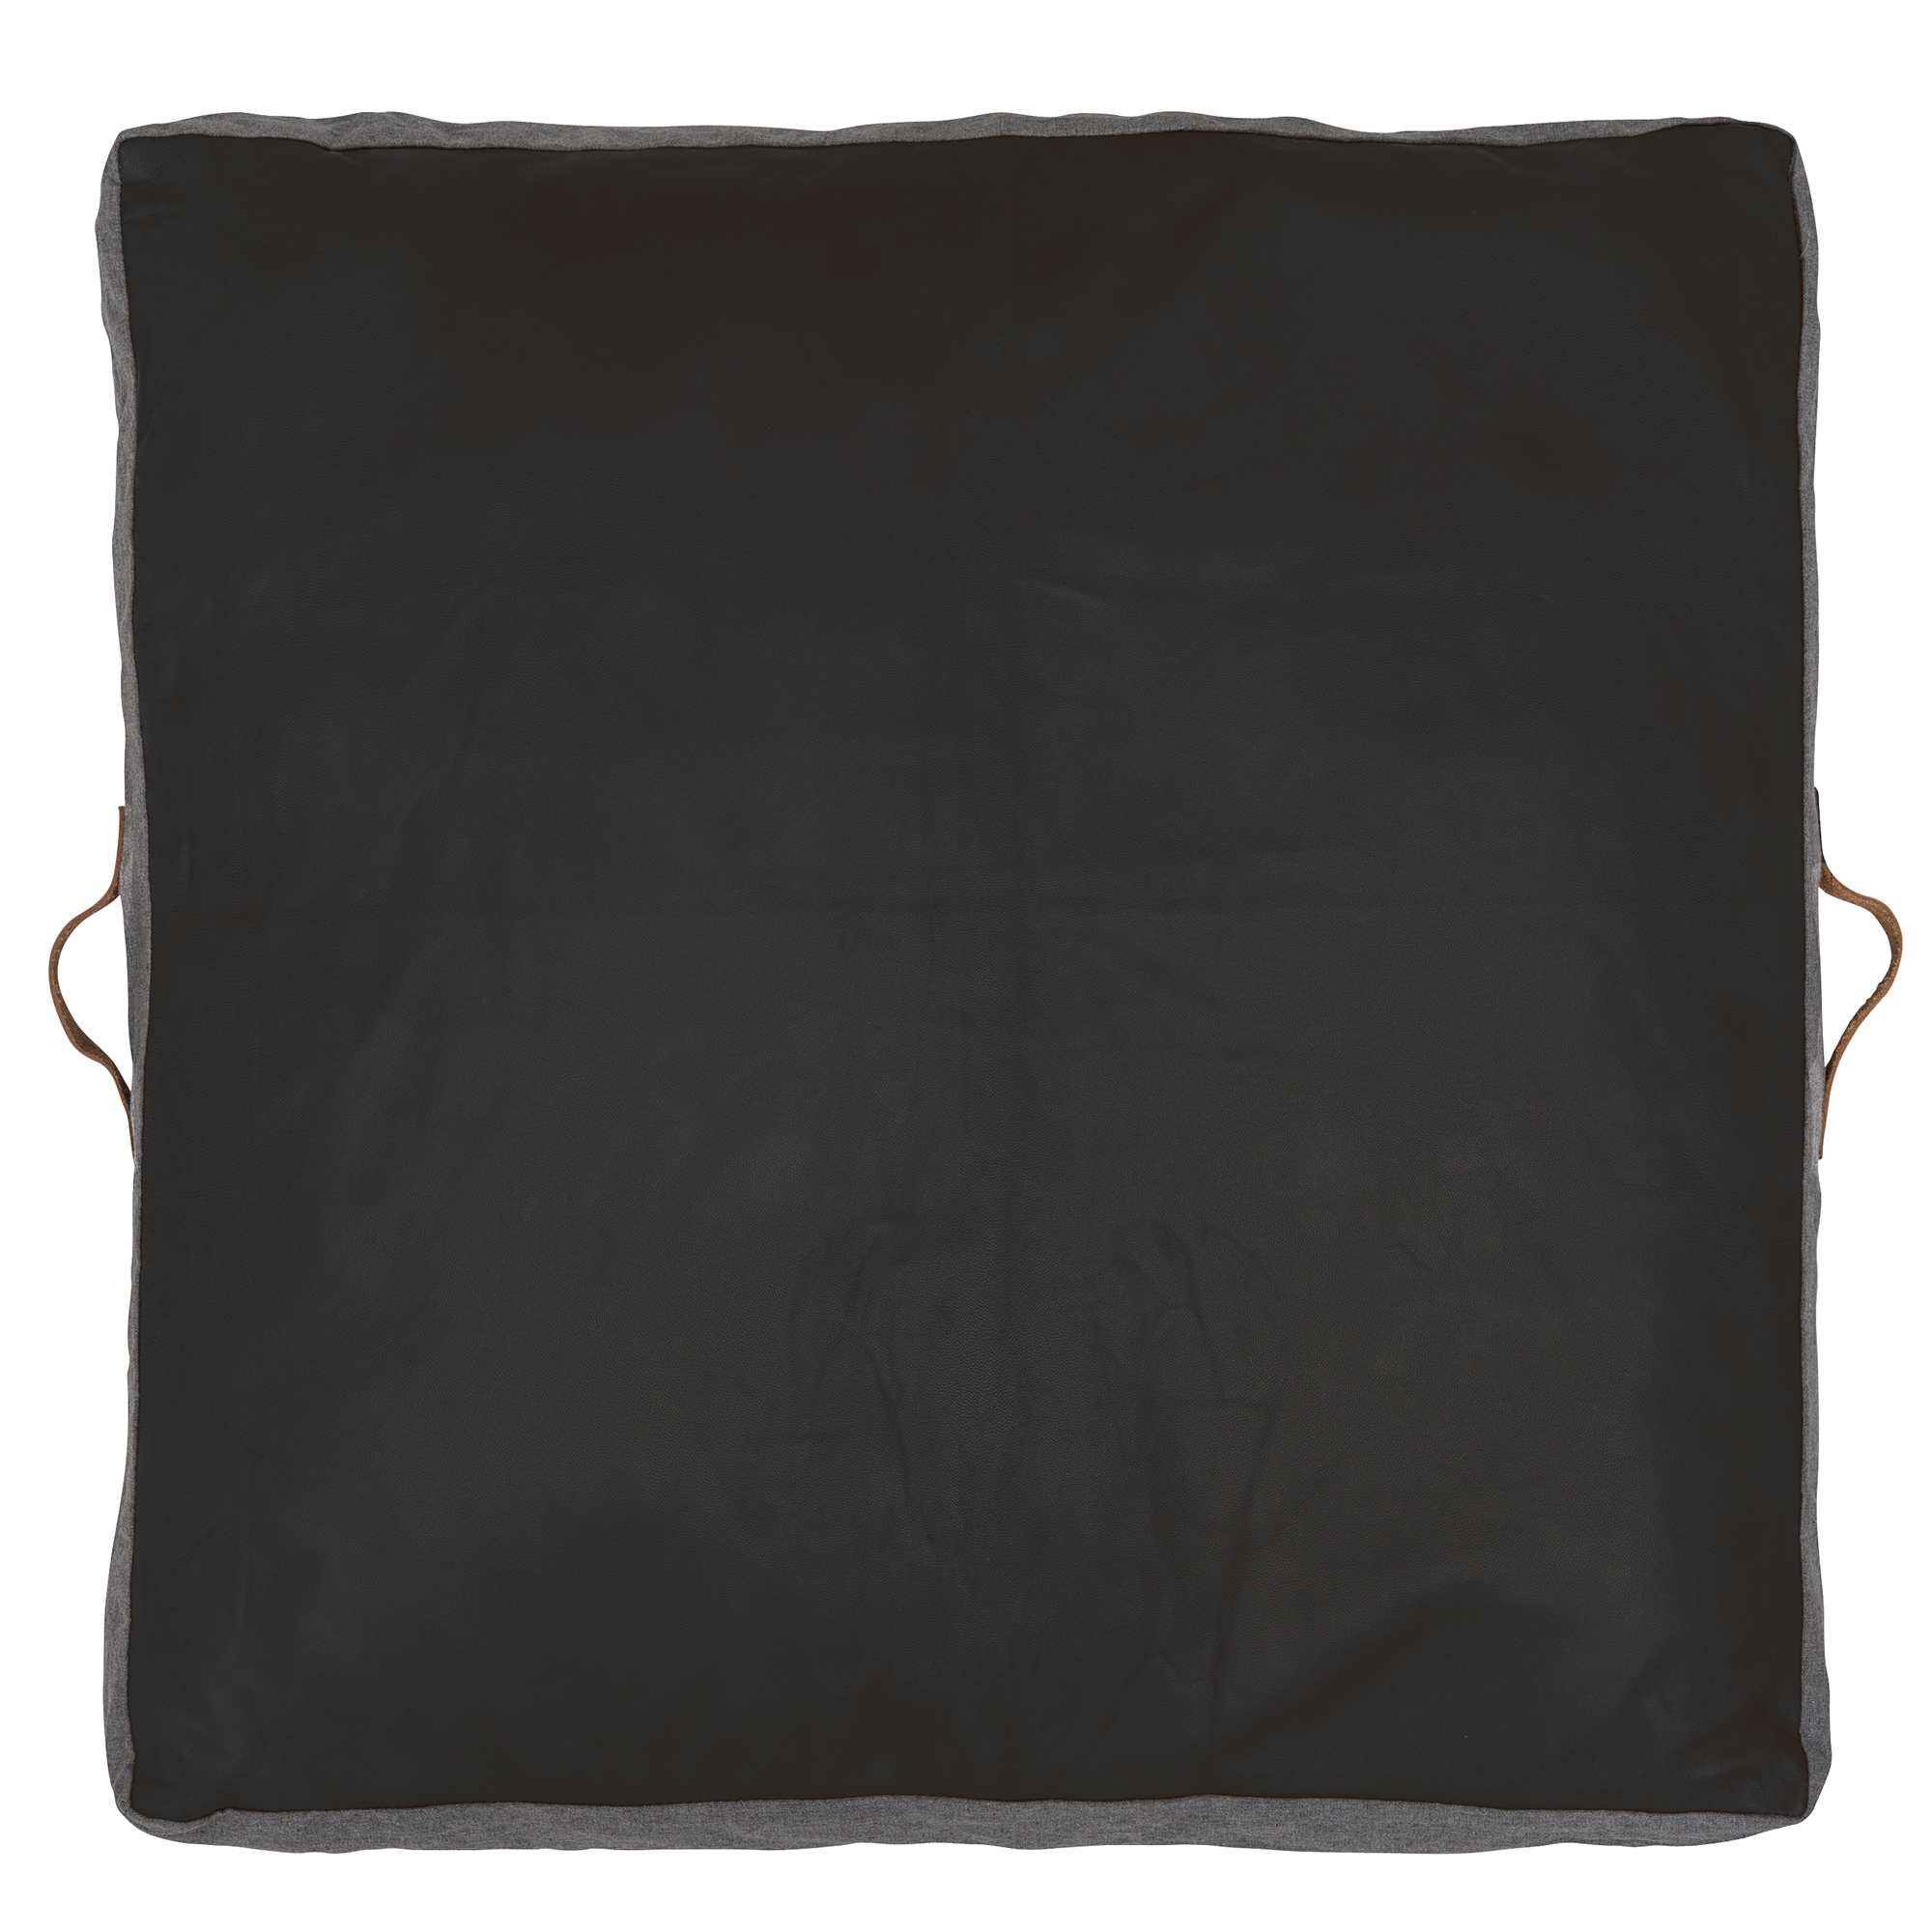 Square Leather Floor Cushion Temple, Leather Floor Cushions Large